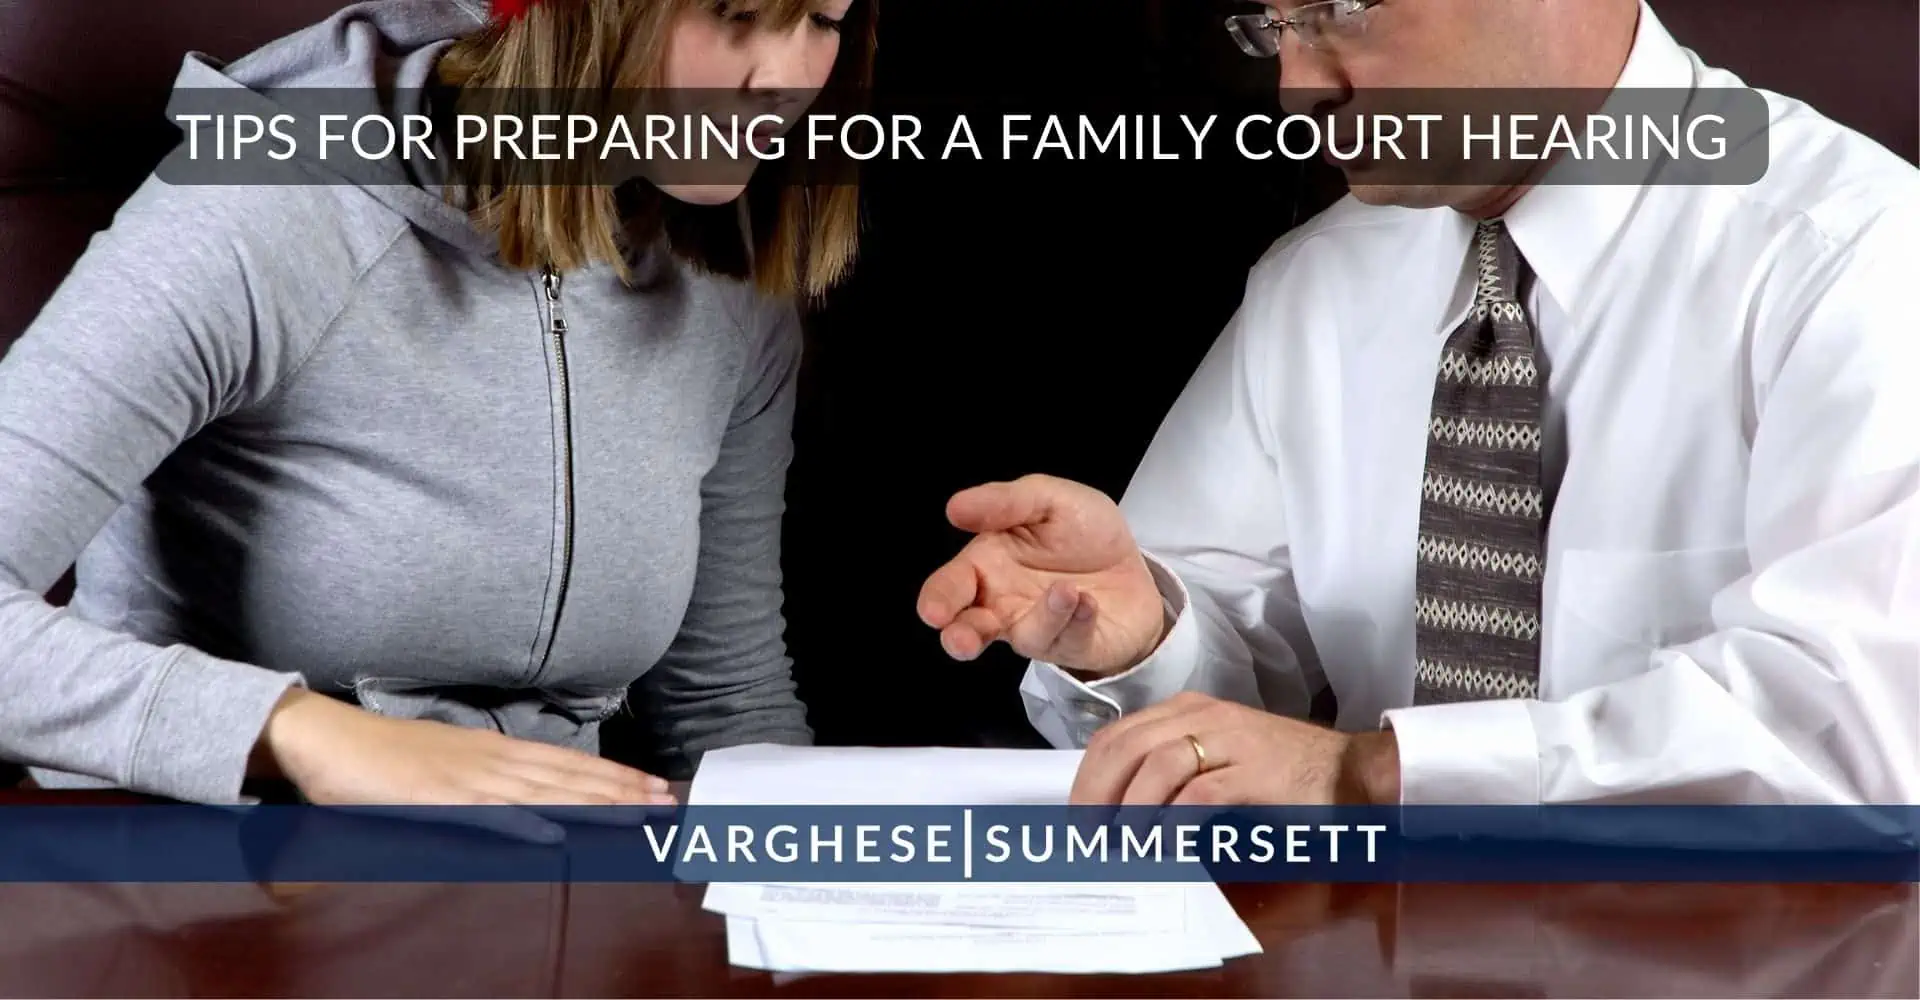 Tips for Preparing for a Family Court Hearing